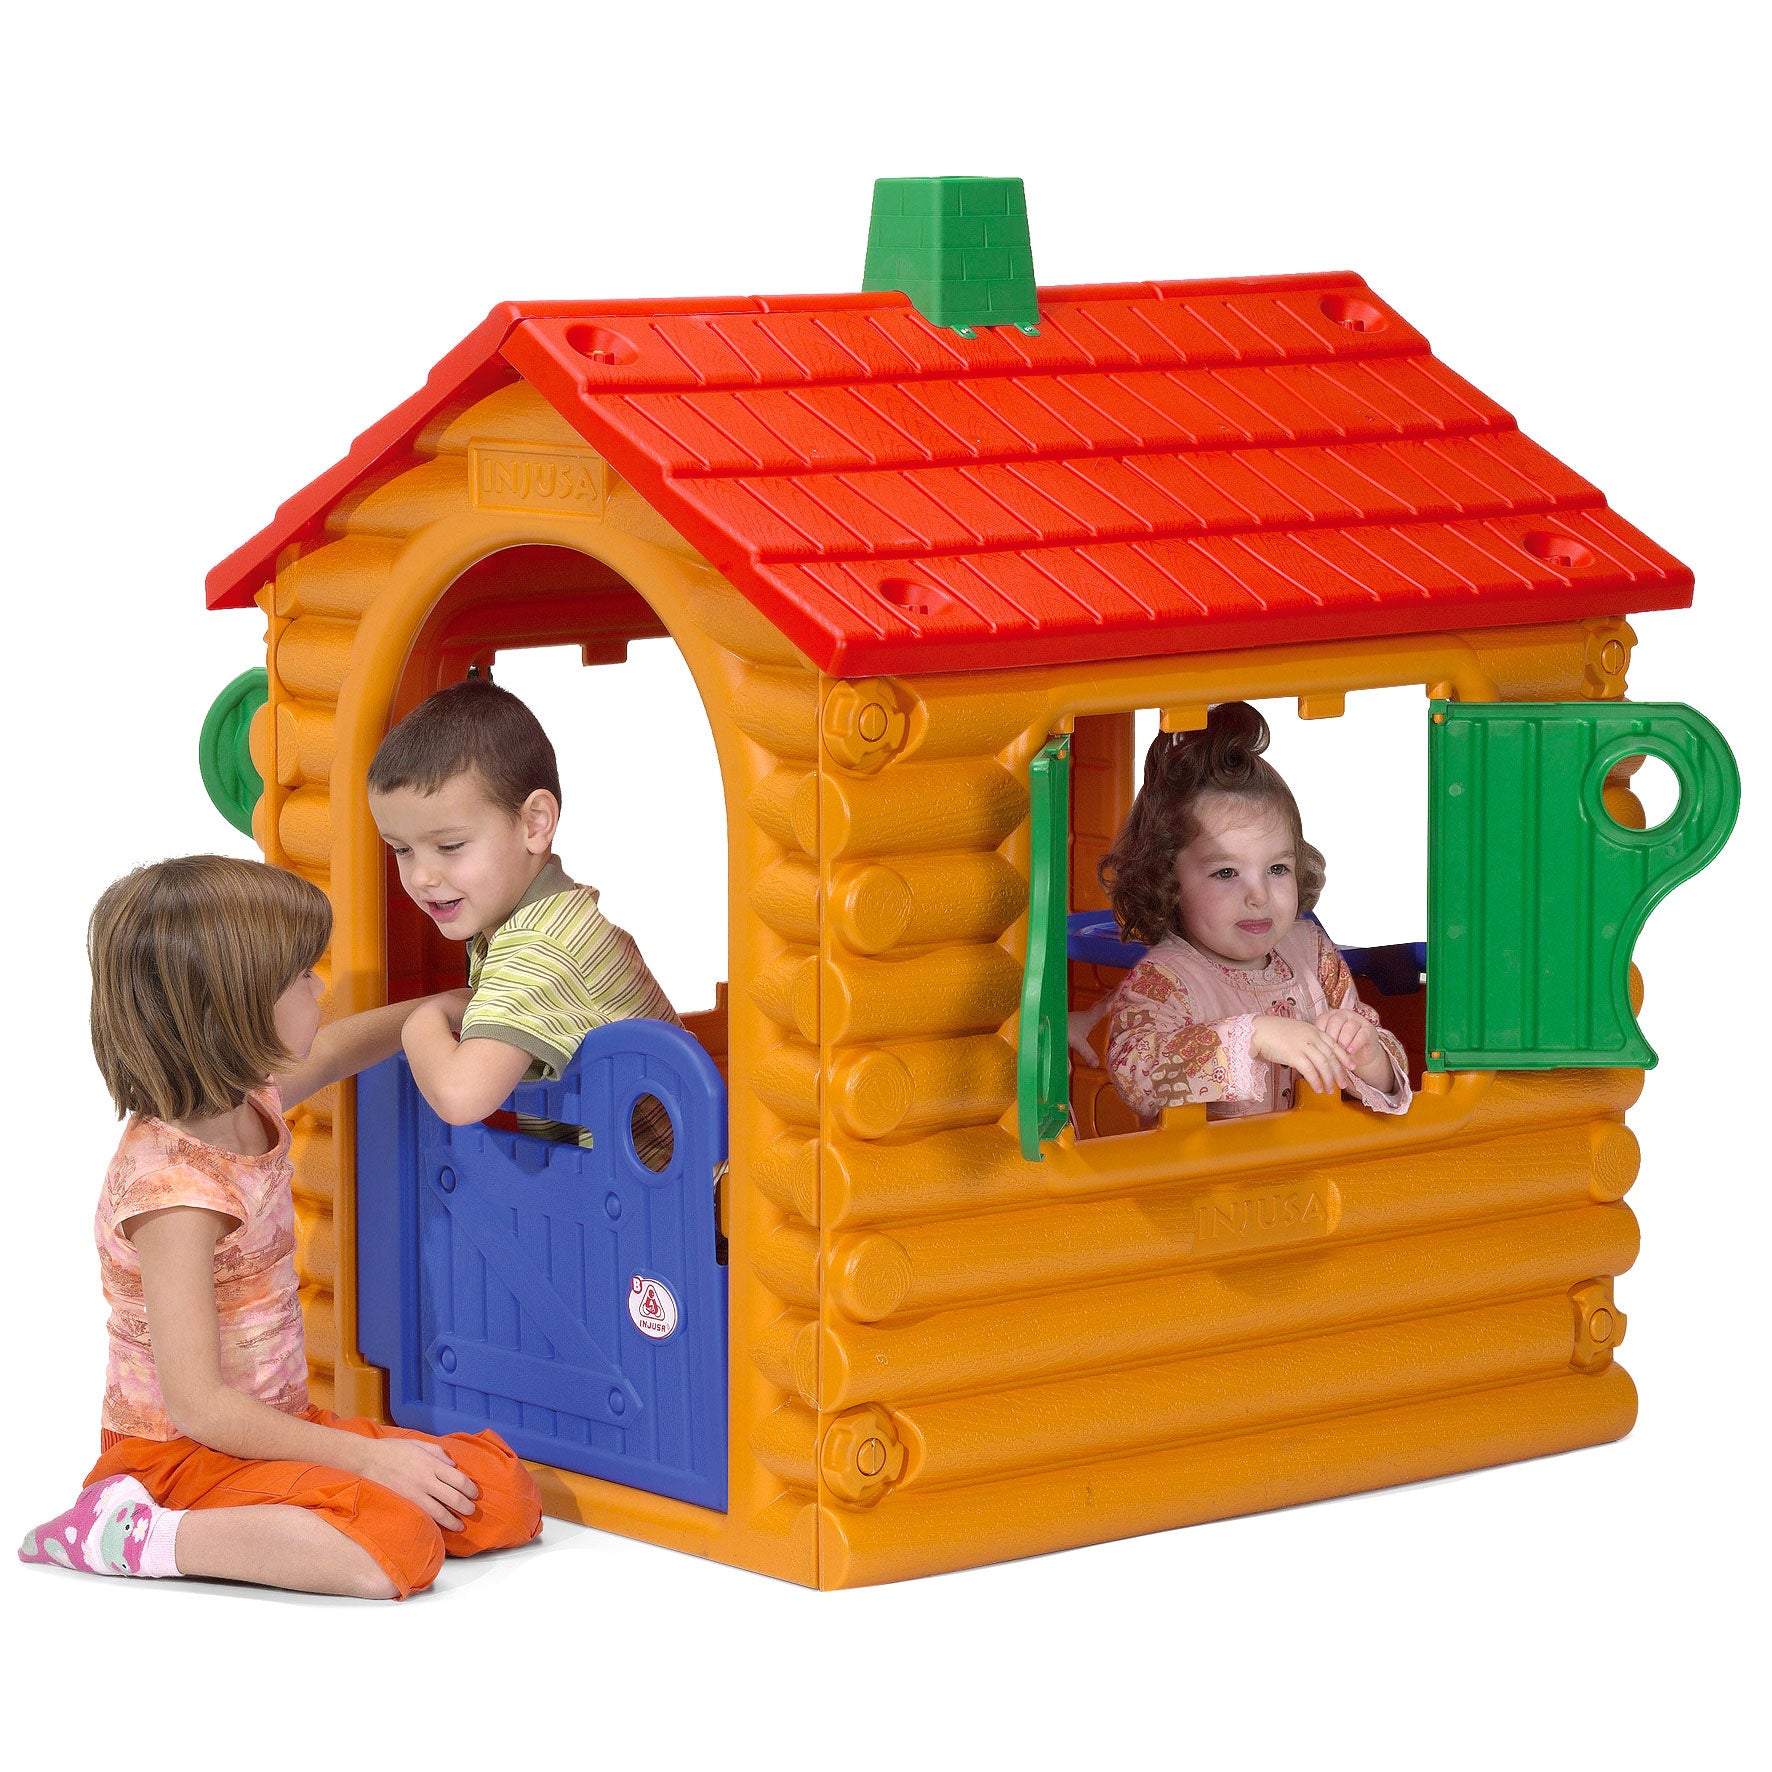 Studio image of the the INJUSA Resin Hut House with kids playing.